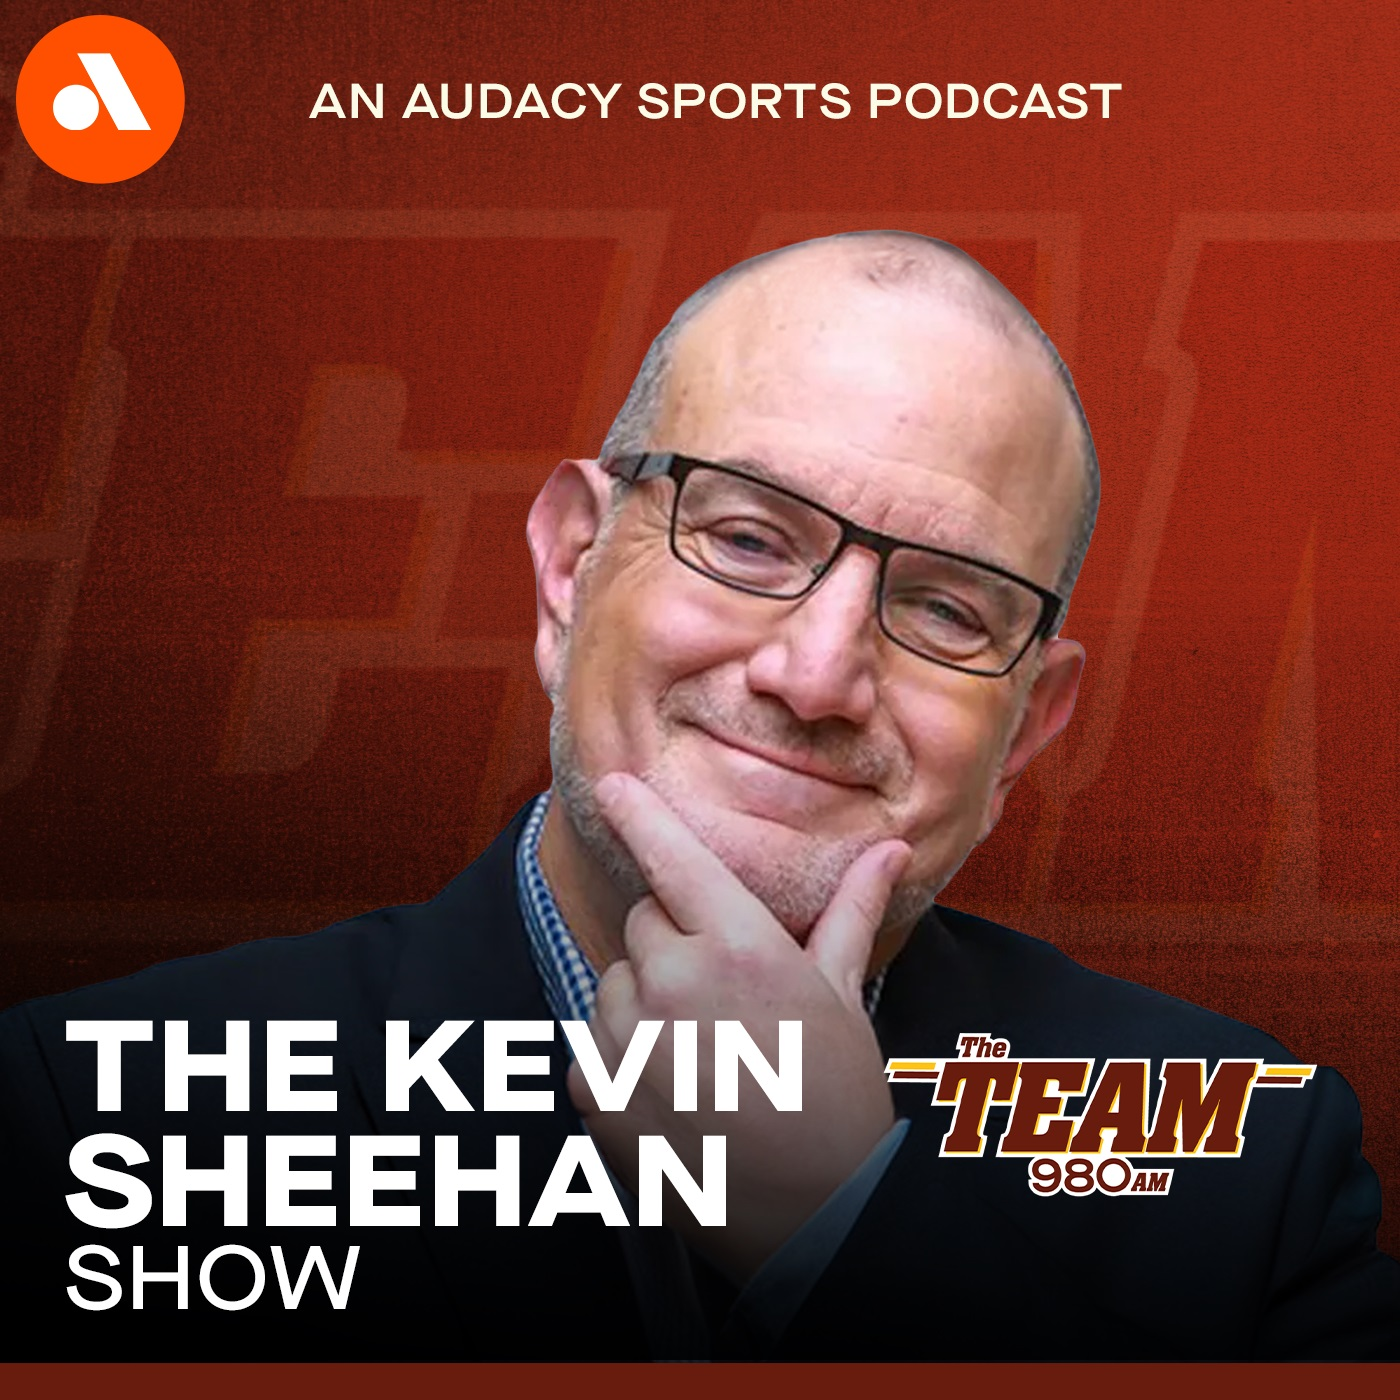 Paul Charchian's weekly fantasy advice - The Kevin Sheehan Show 